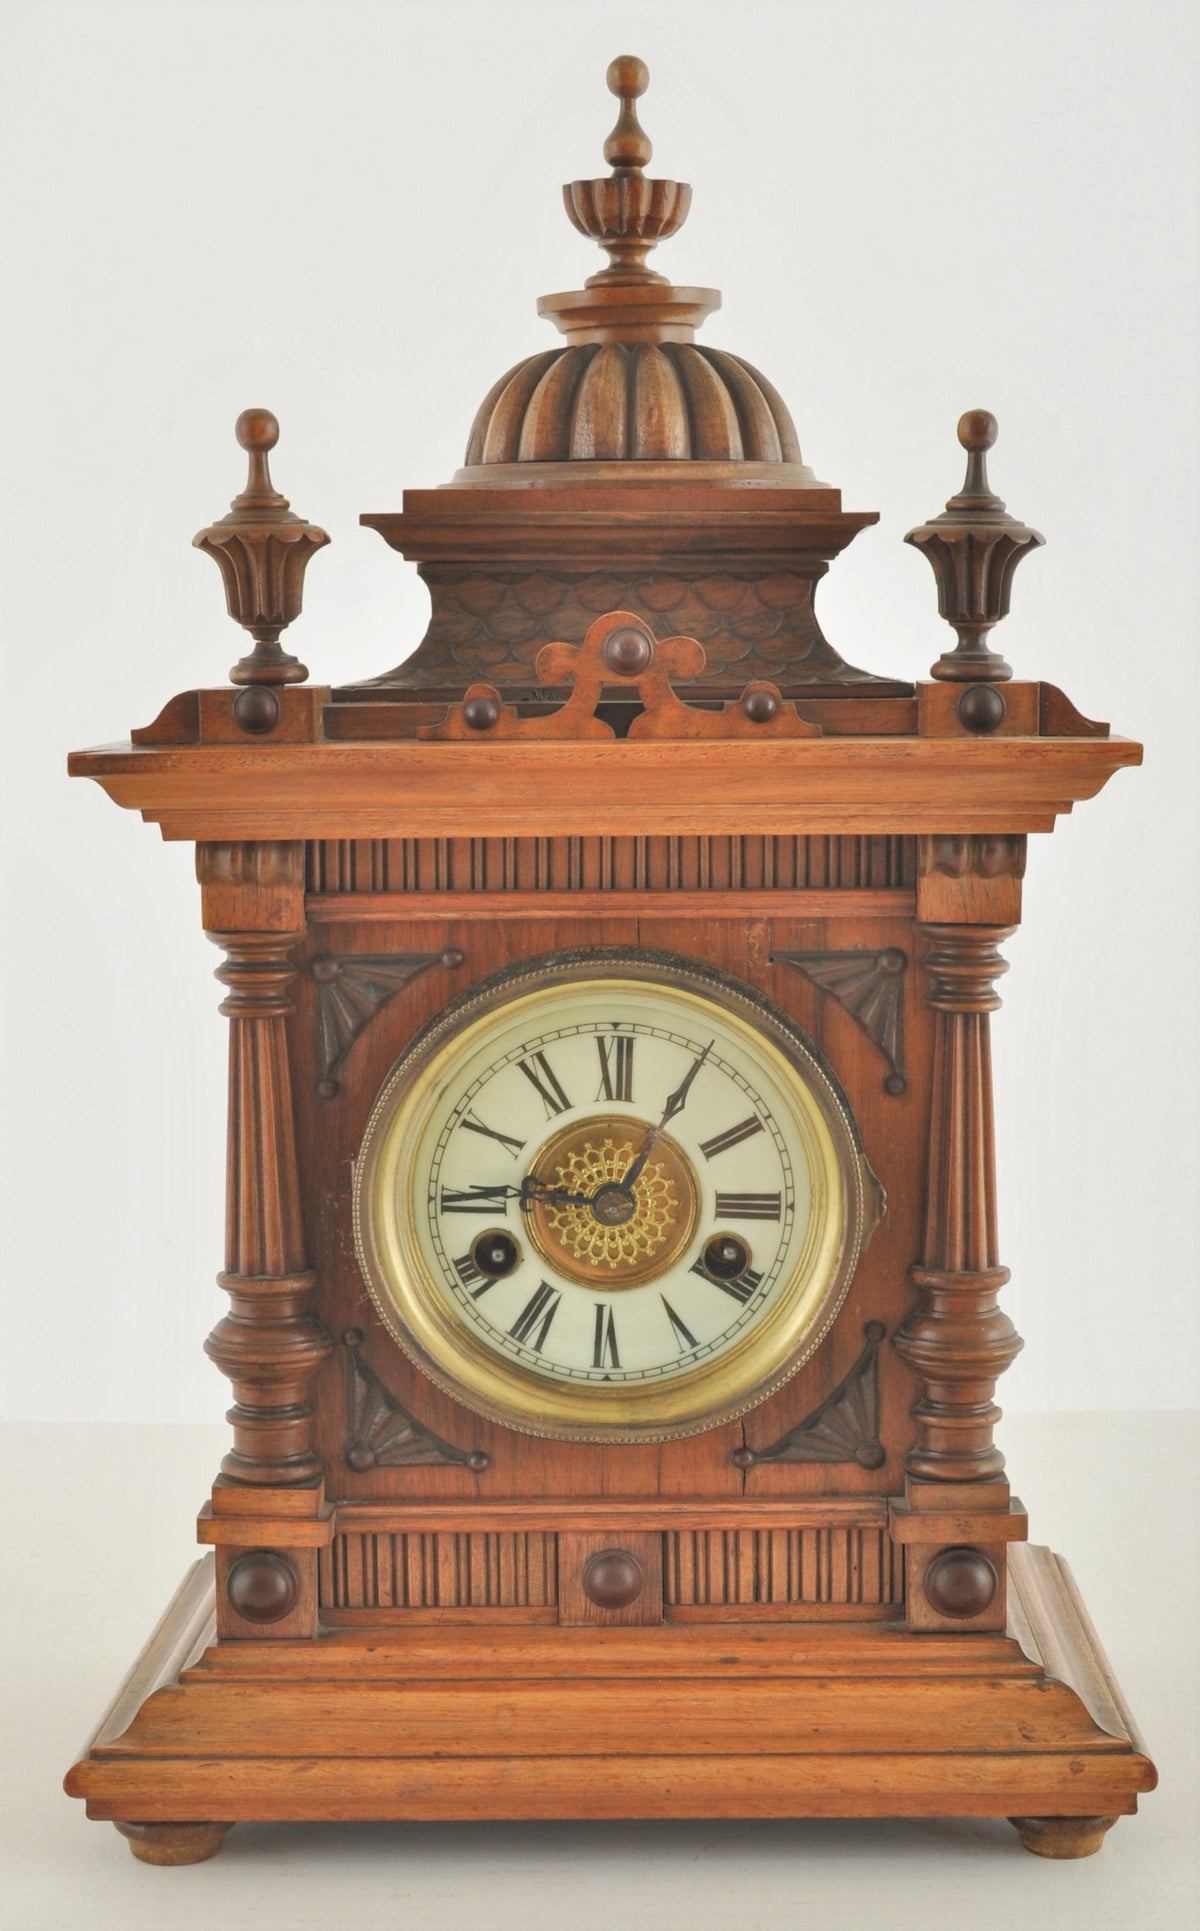 Antique German Wertenberg "Greenwich" 8-Day Time and Strike Mantel Clock Retailed by W. E. Watts of Nottingham, circa 1880